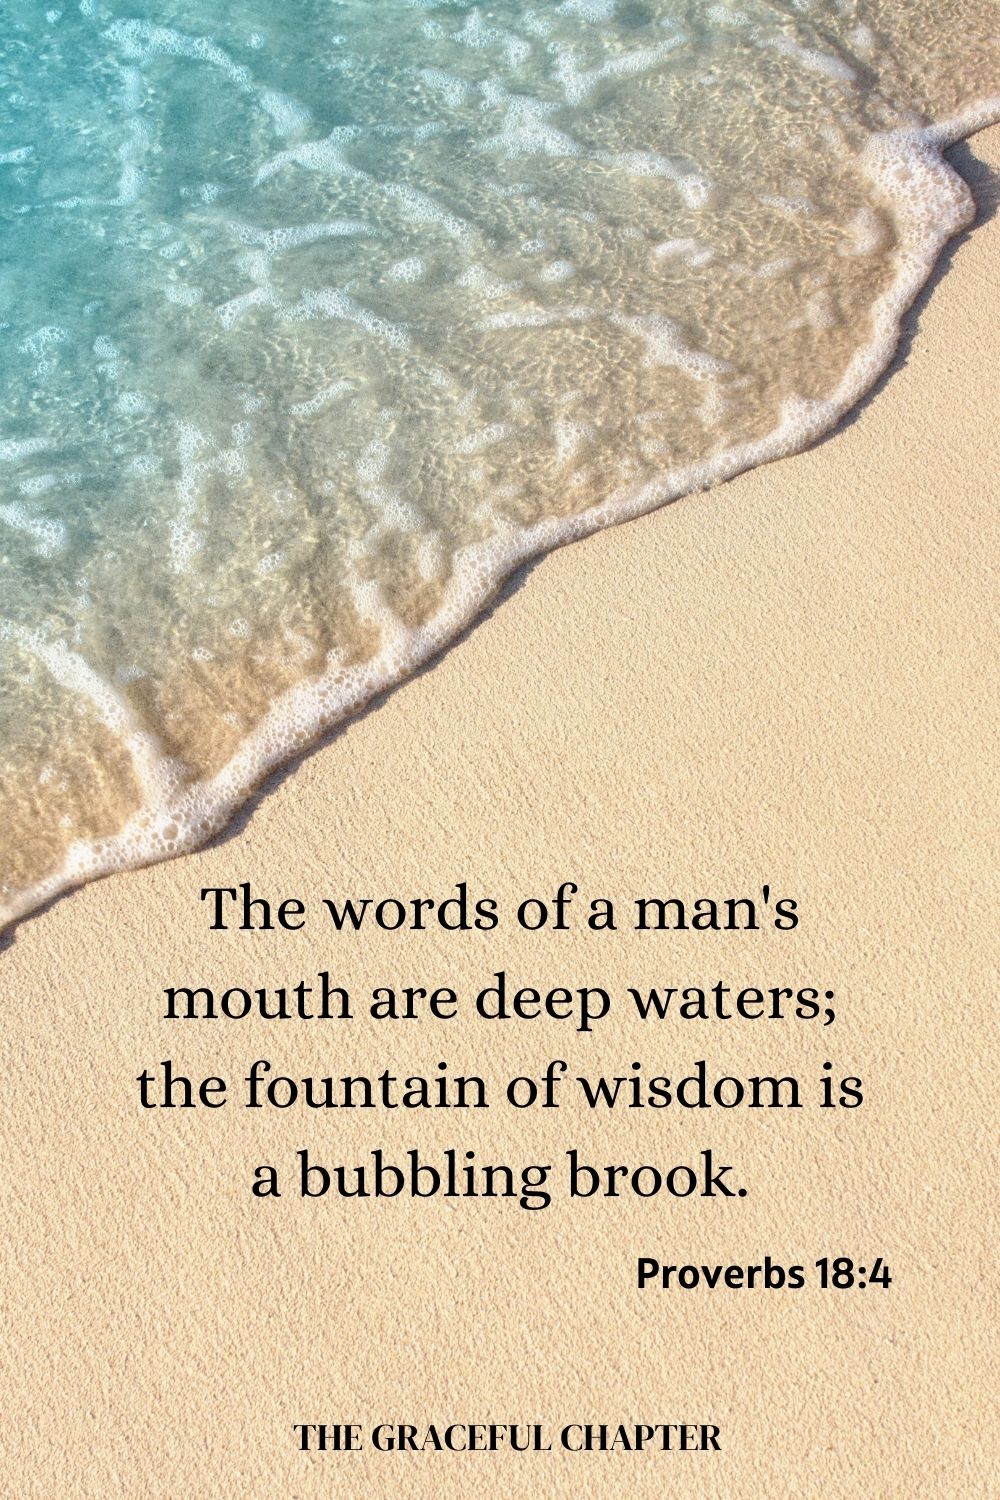 The words of a man's mouth are deep waters; the fountain of wisdom is a bubbling brook. Proverbs 18:4